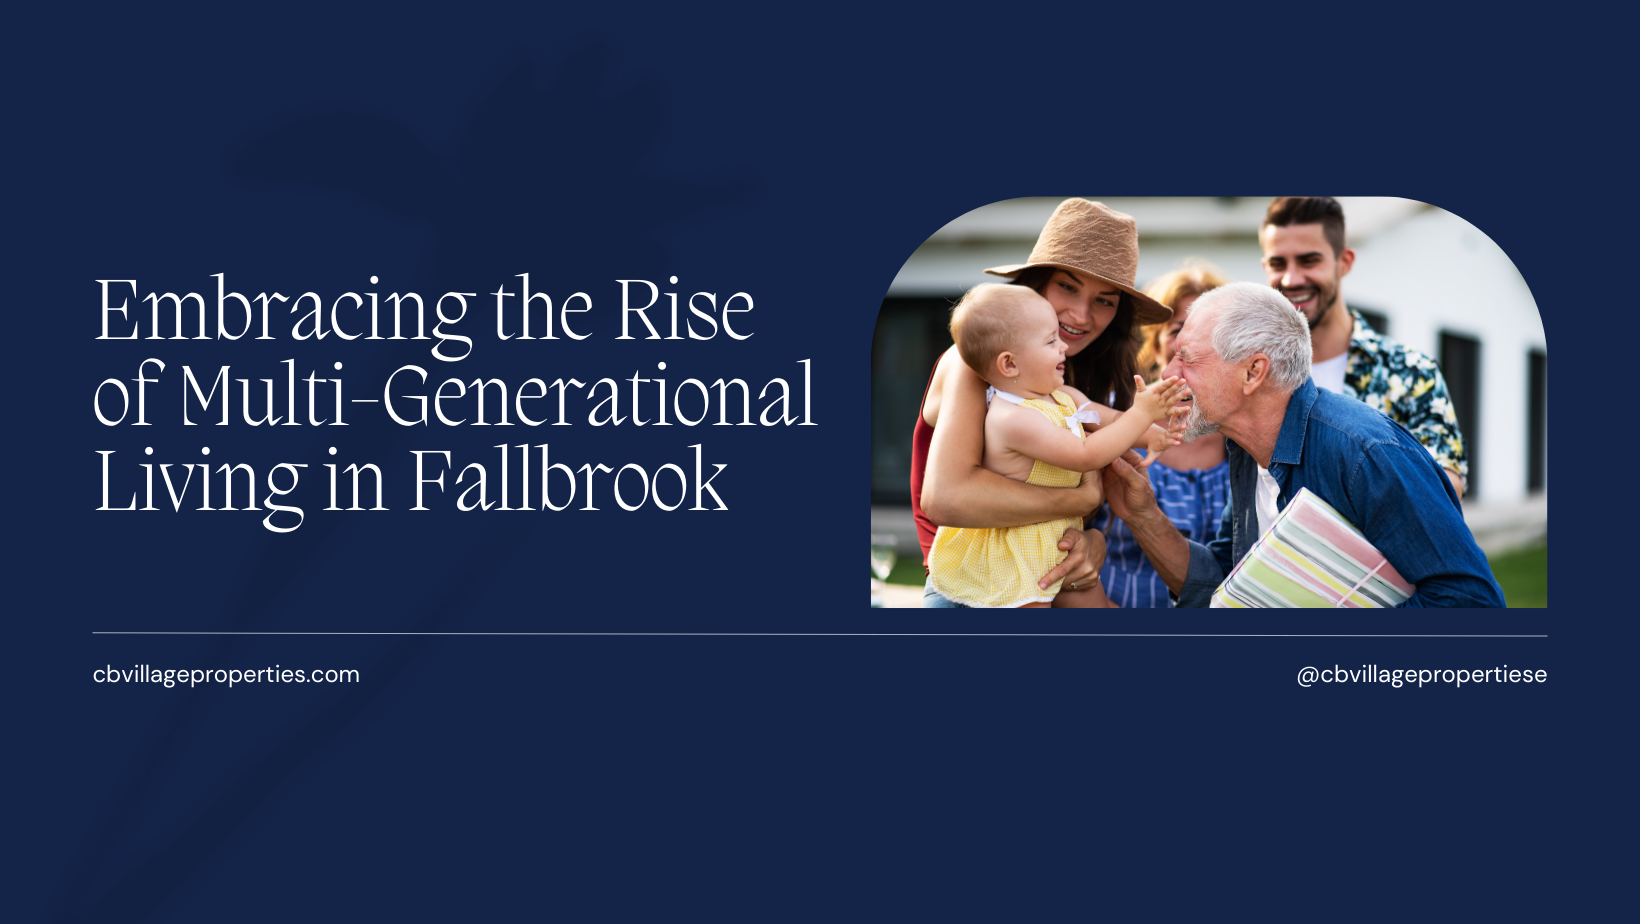 Embracing the Rise of Multi-Generational Living in Fallbrook